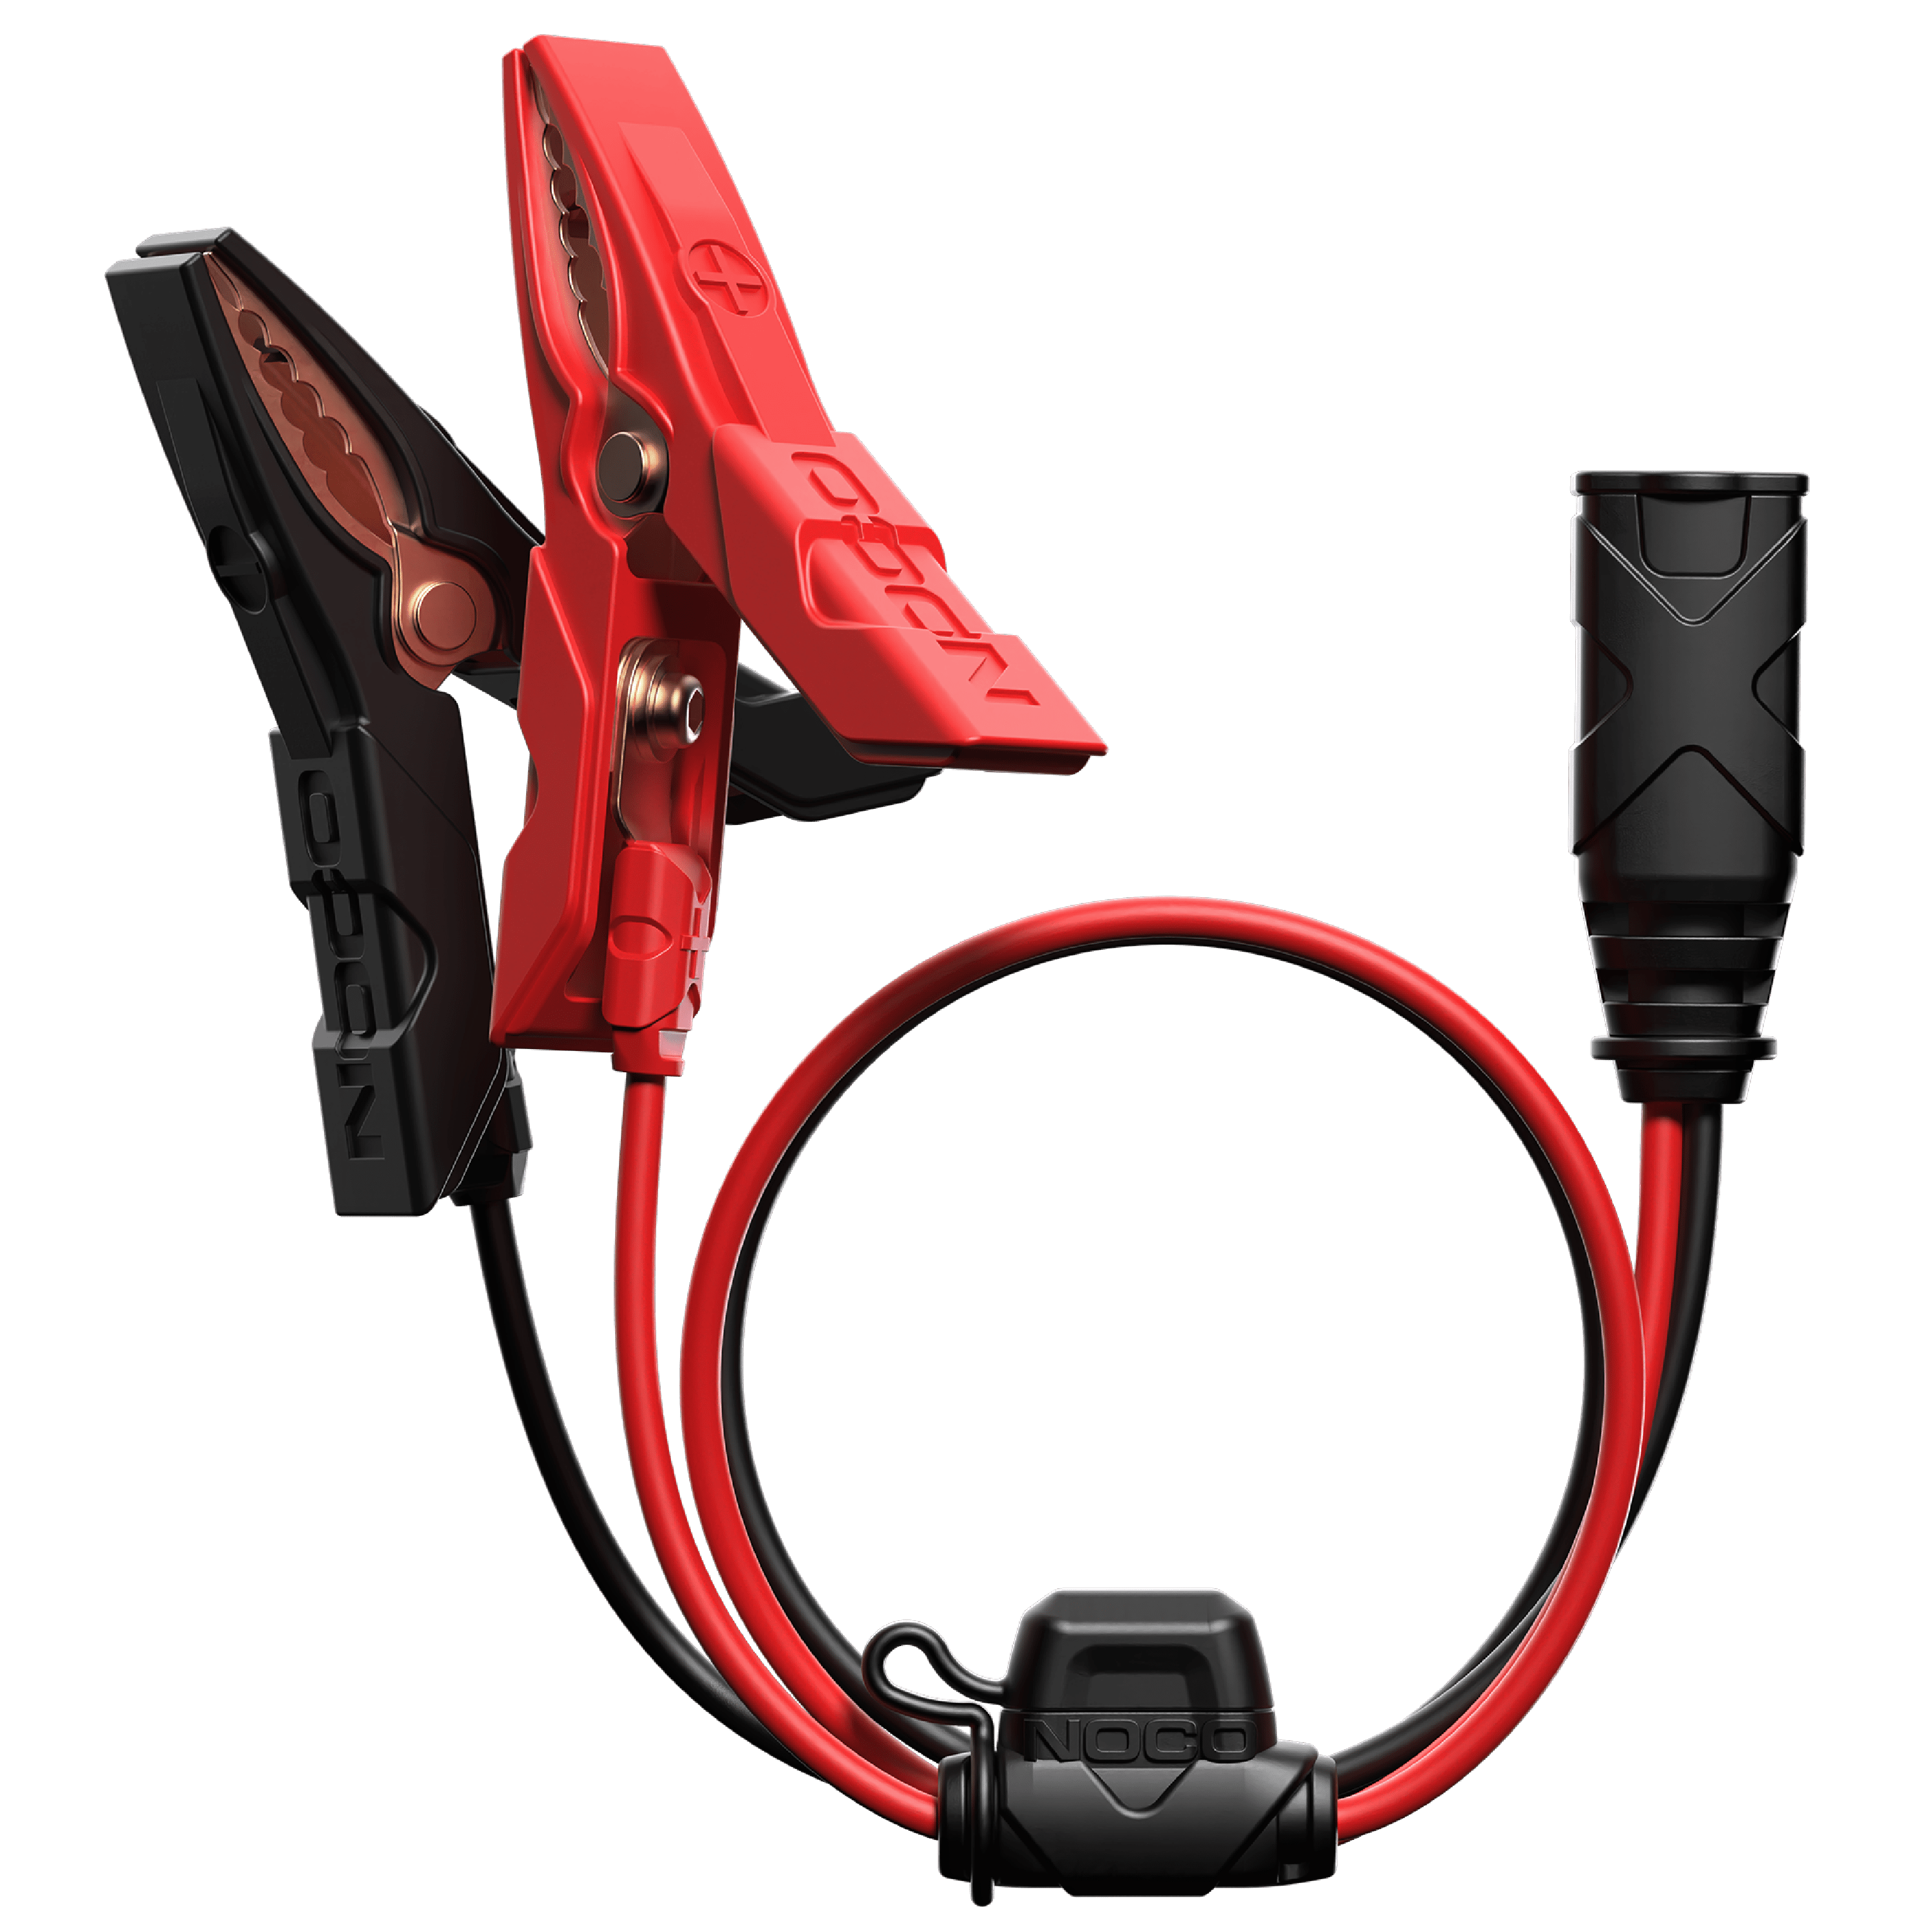 Western Powersports Battery Charger Accessory X-Connect Battery Clamps by Noco Genius GC001